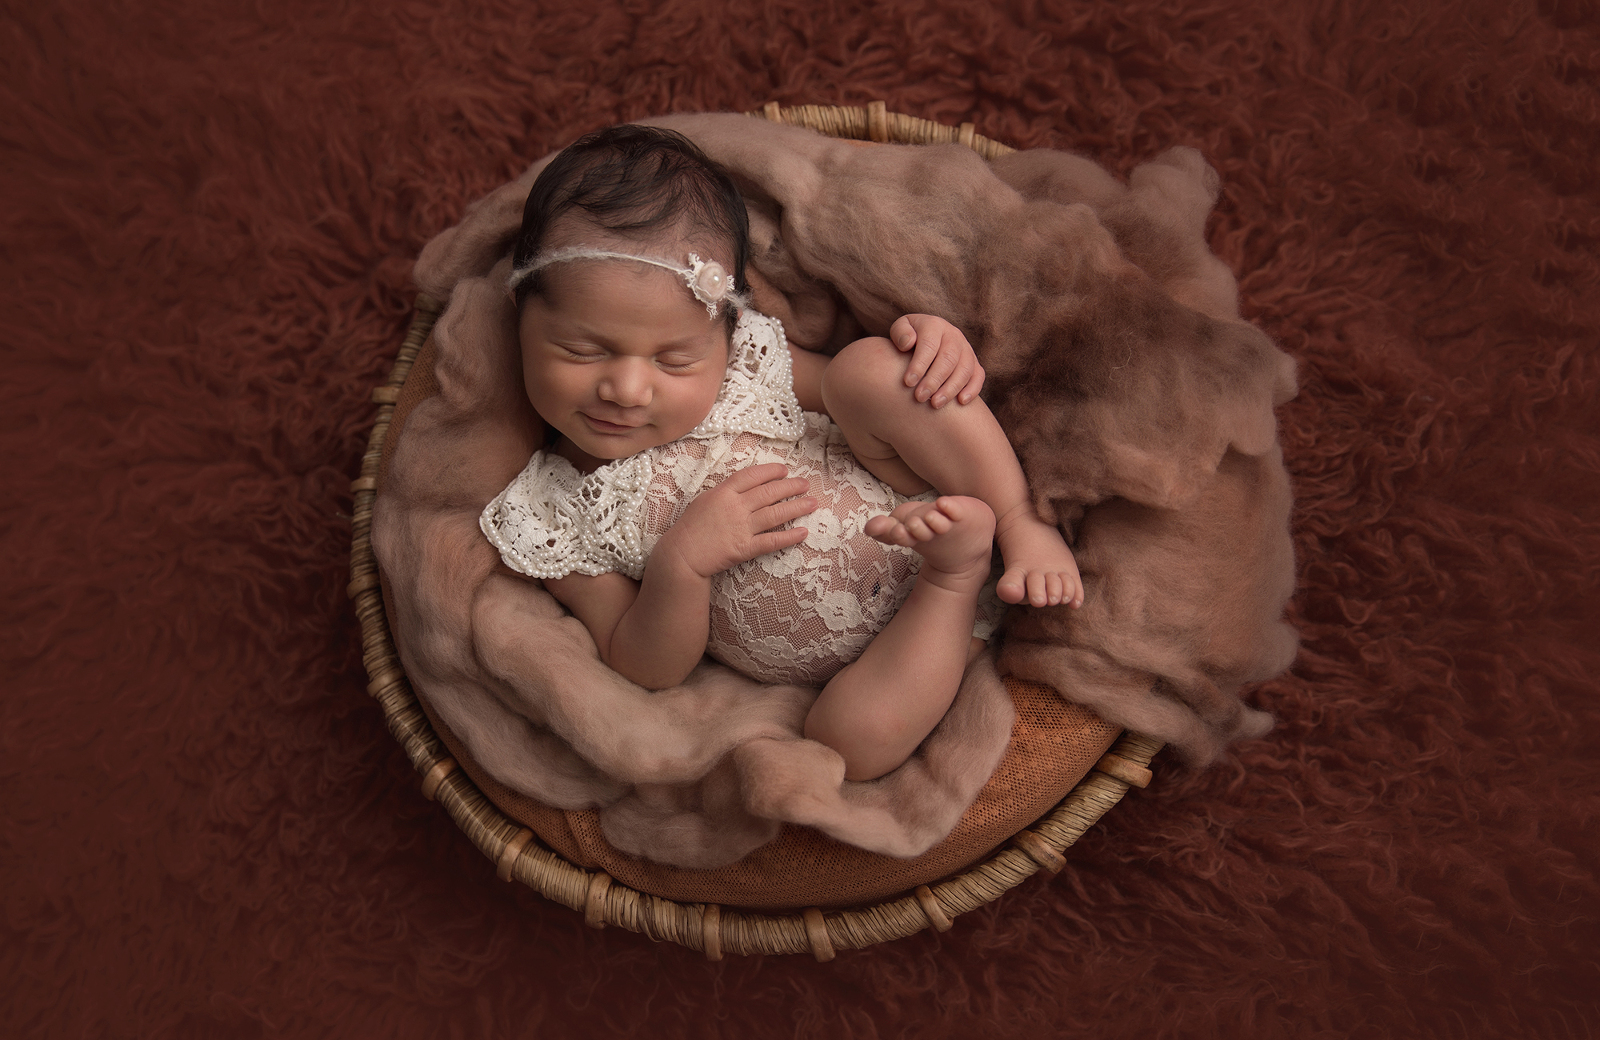 Studio newborn portrait session with brown background, featuring a shot from above of a smiling baby sleeping in a round basket wearing a lace onesie and flower headband. Image by Helga Himer Photography, Sudbury, Ontario.